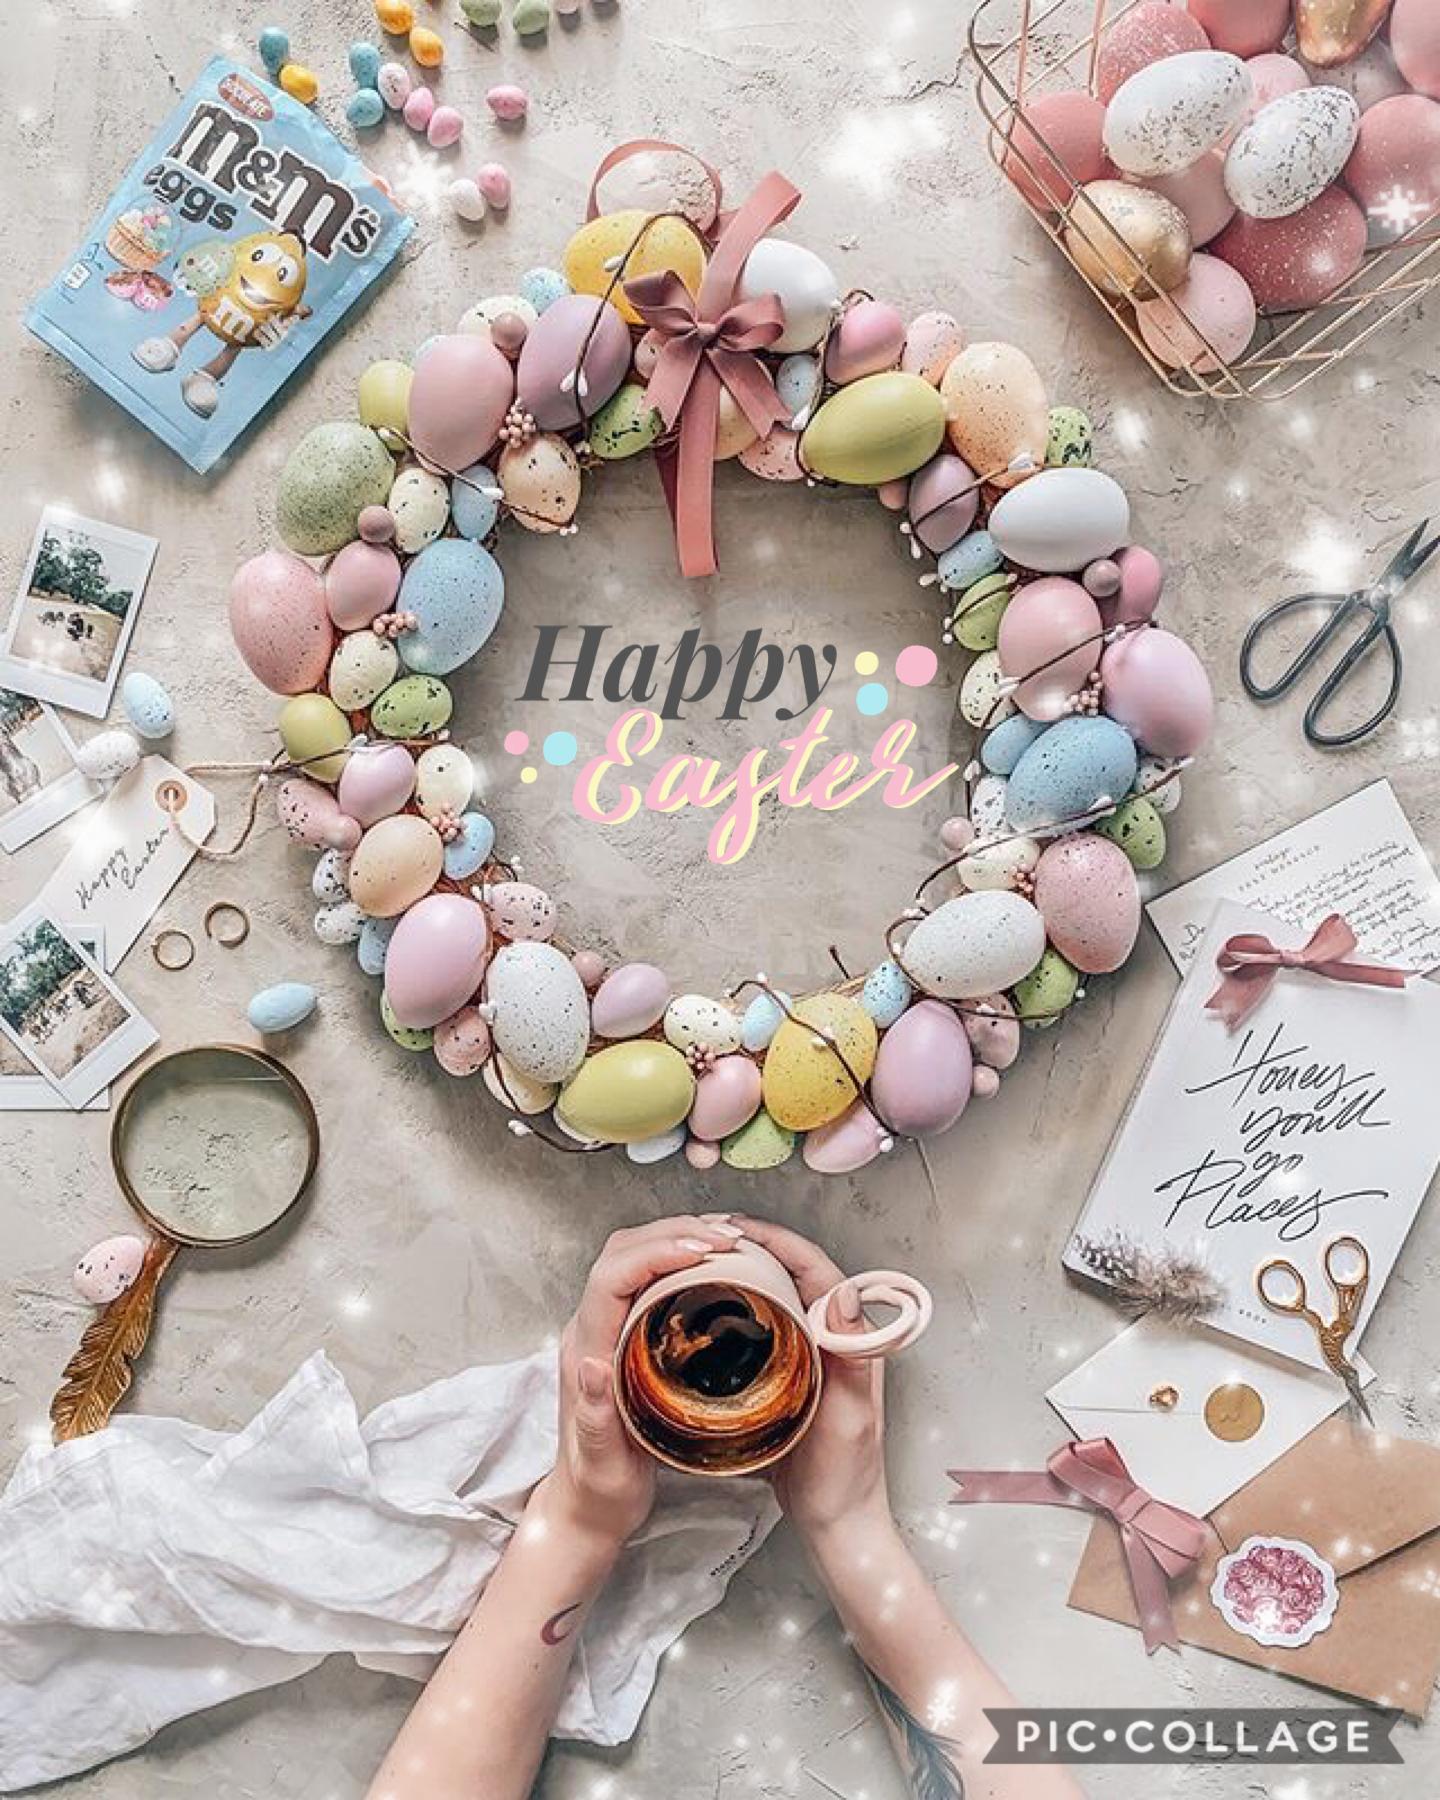 Happy Easter!🐣💛
I know it’s been ages, but I’m trying to come back 😂 I’ve lost so much inspiration recently but hopefully I can stay as active as I can 😊
How have you all been?i know these are such uncertain times but on pic collage we can all stand toget